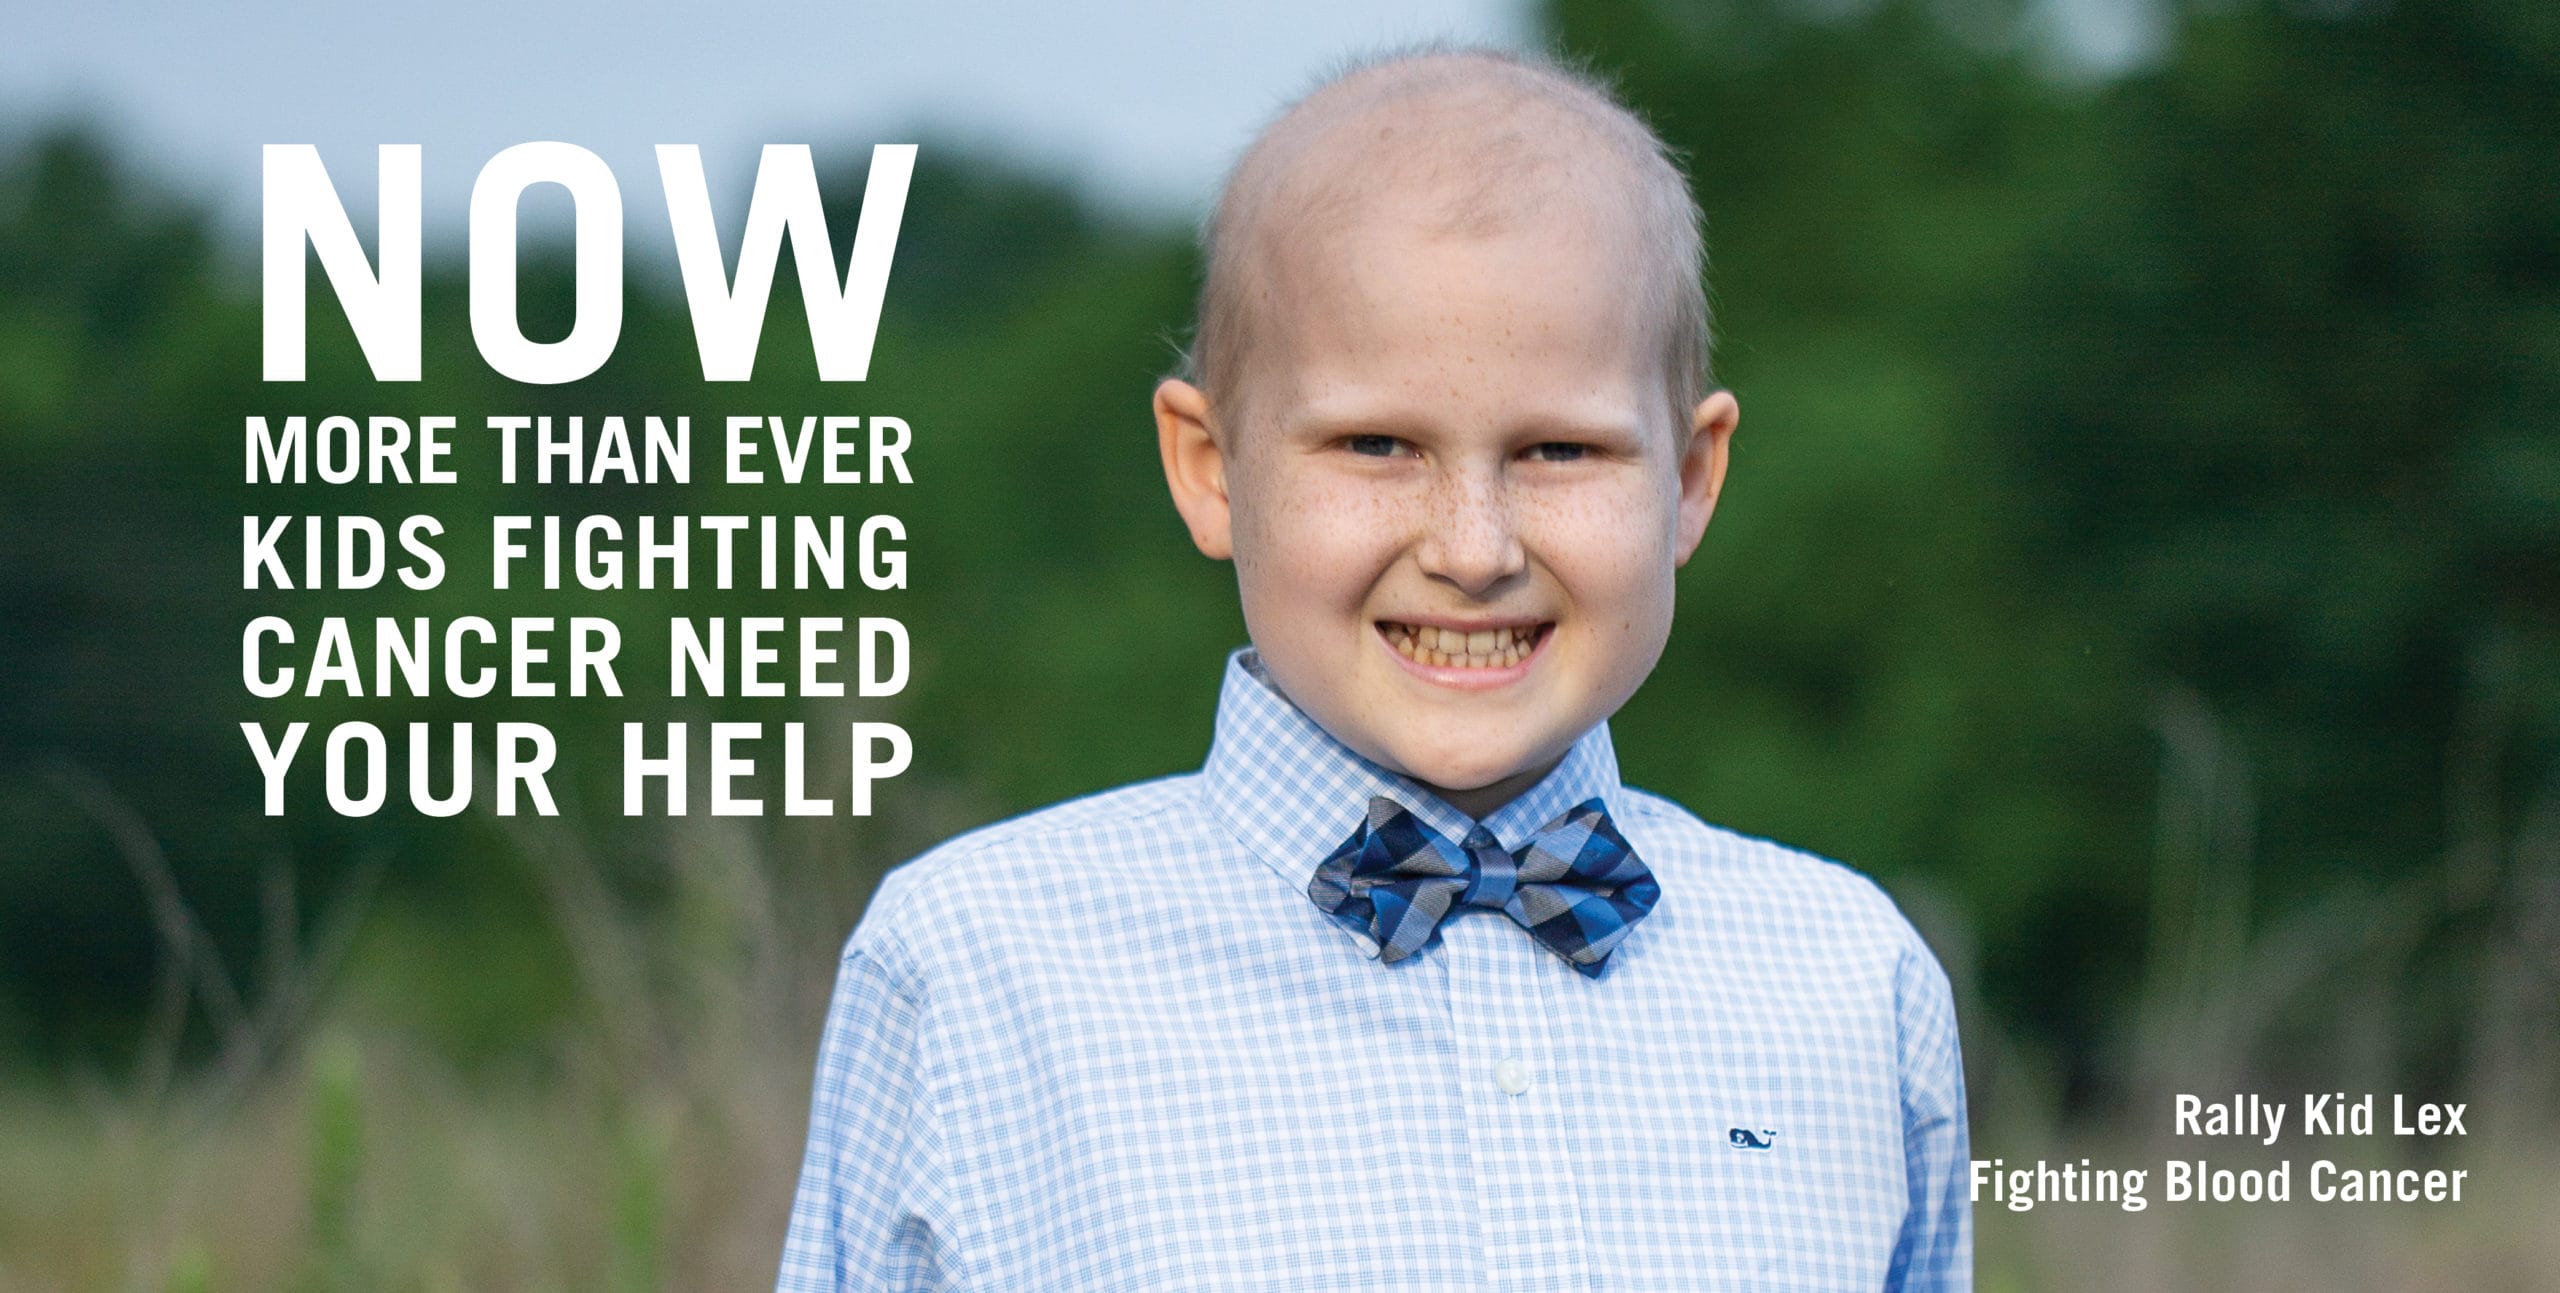 Meet Rally Kid Lex: A Fun-Loving 11-Year-Old Who’s Fighting Blood Cancer